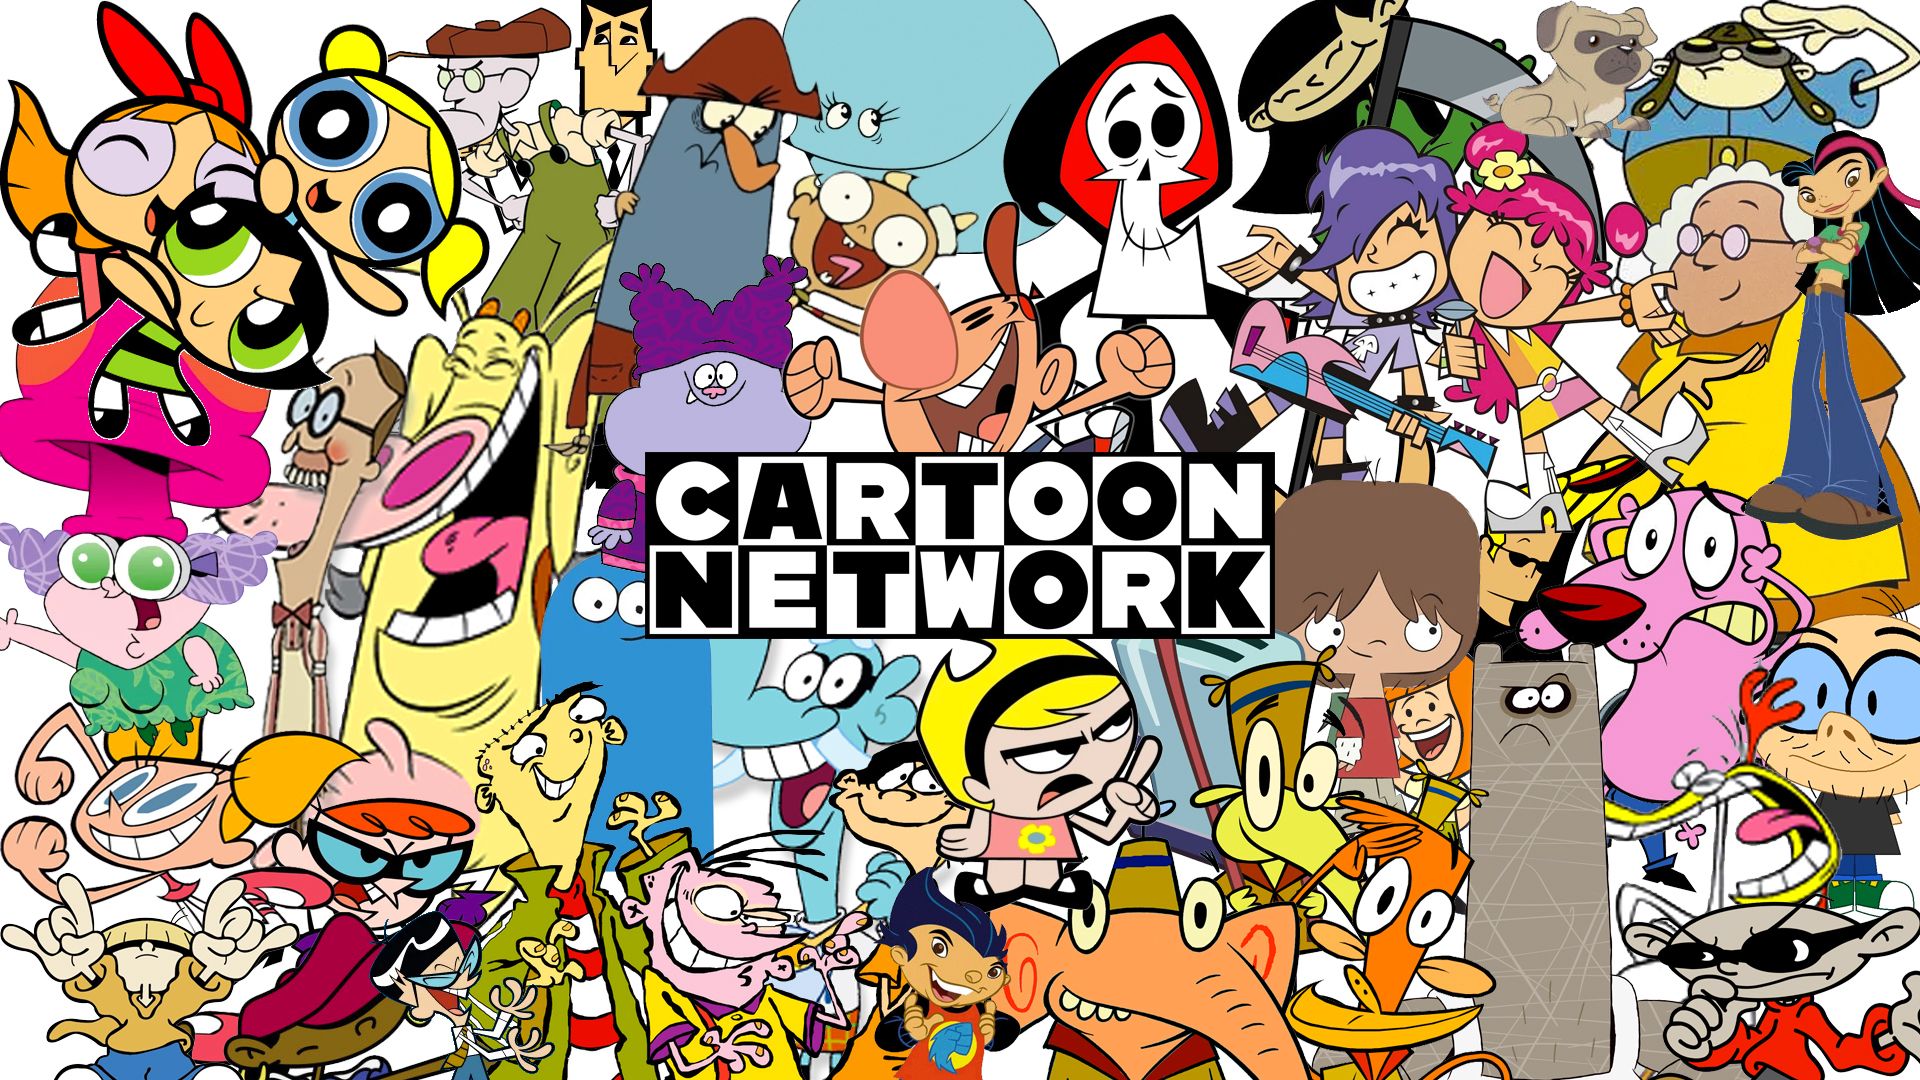 Cartoon Network Wallpapers Hd posted by Samantha Simpson.